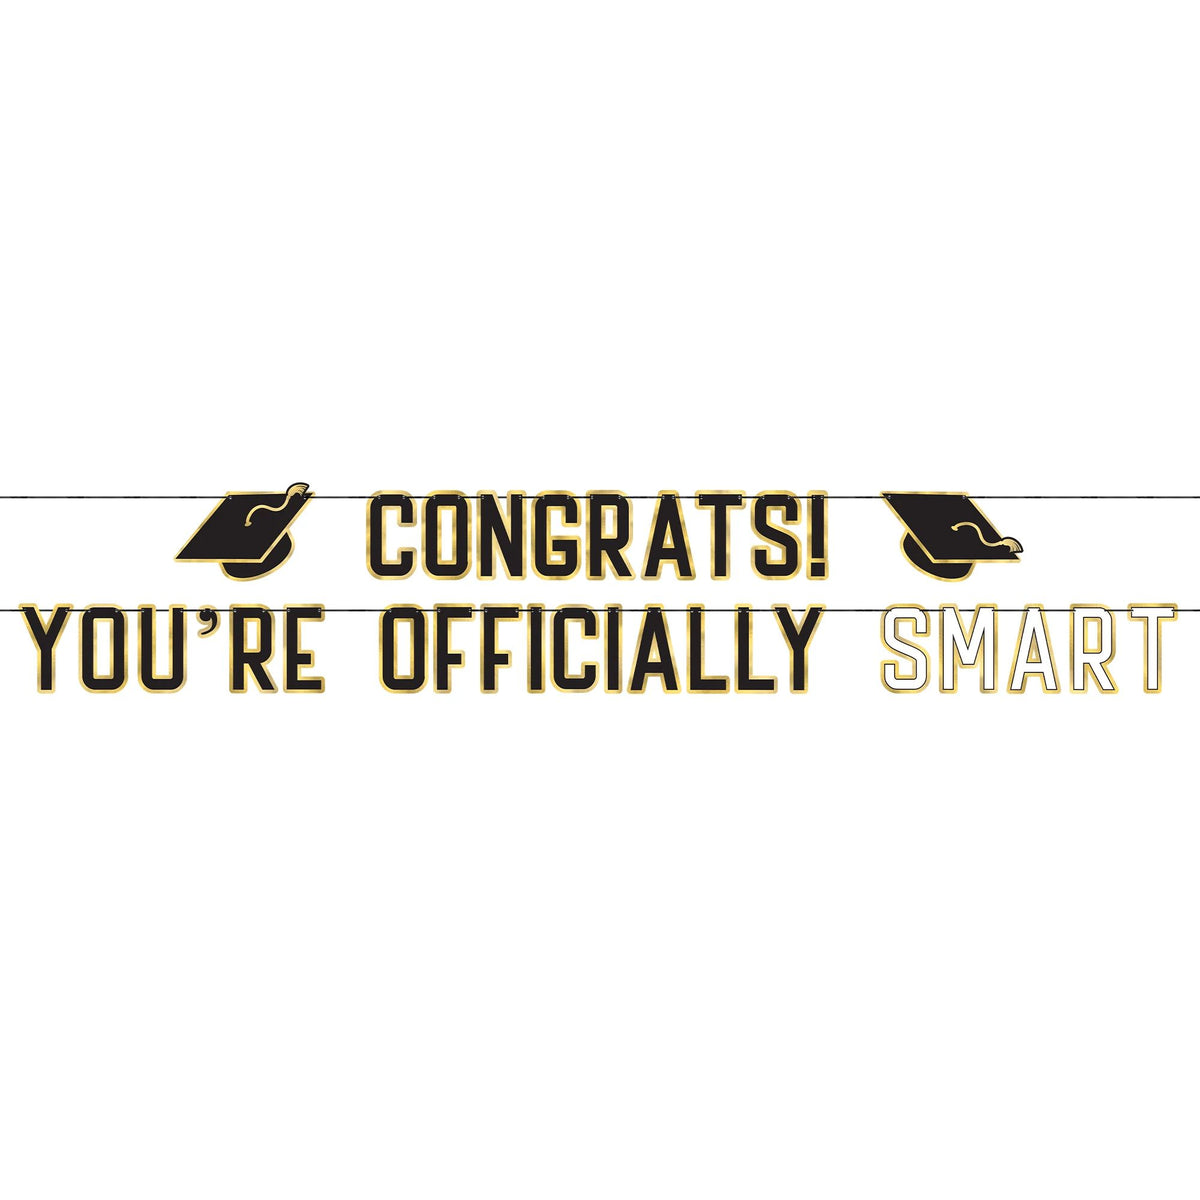 "You're Officially Smart" Letter Banner Set